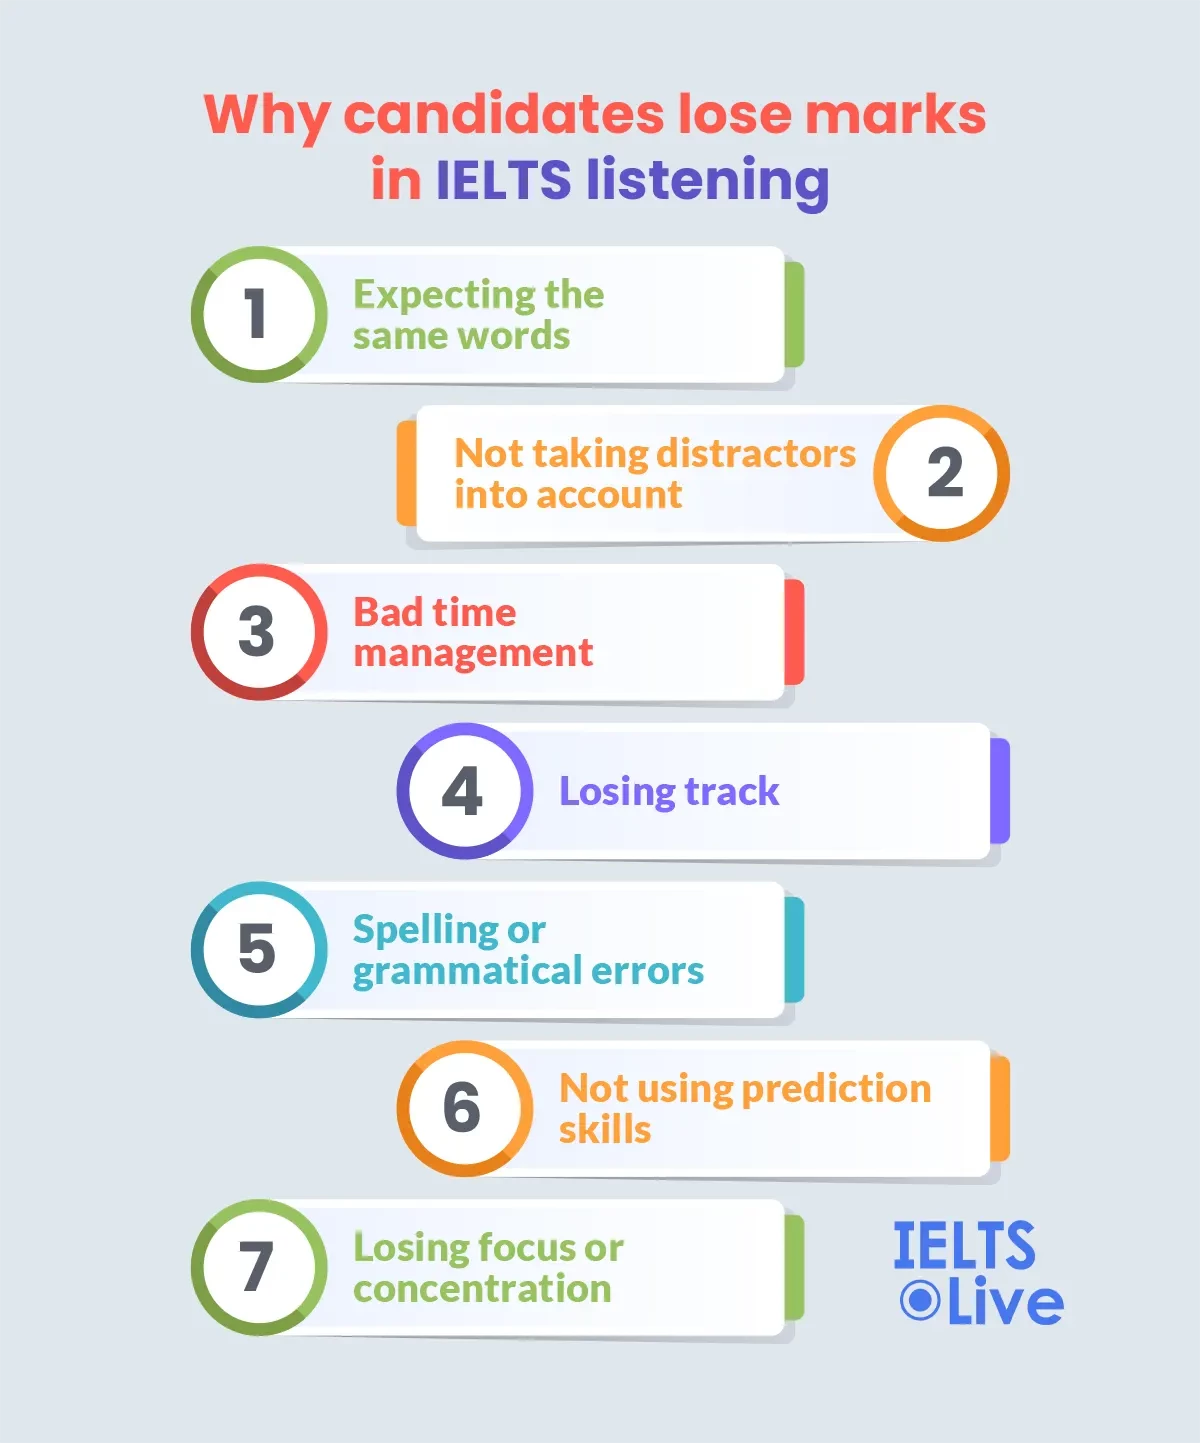 Why candidates lose marks in IELTS listening